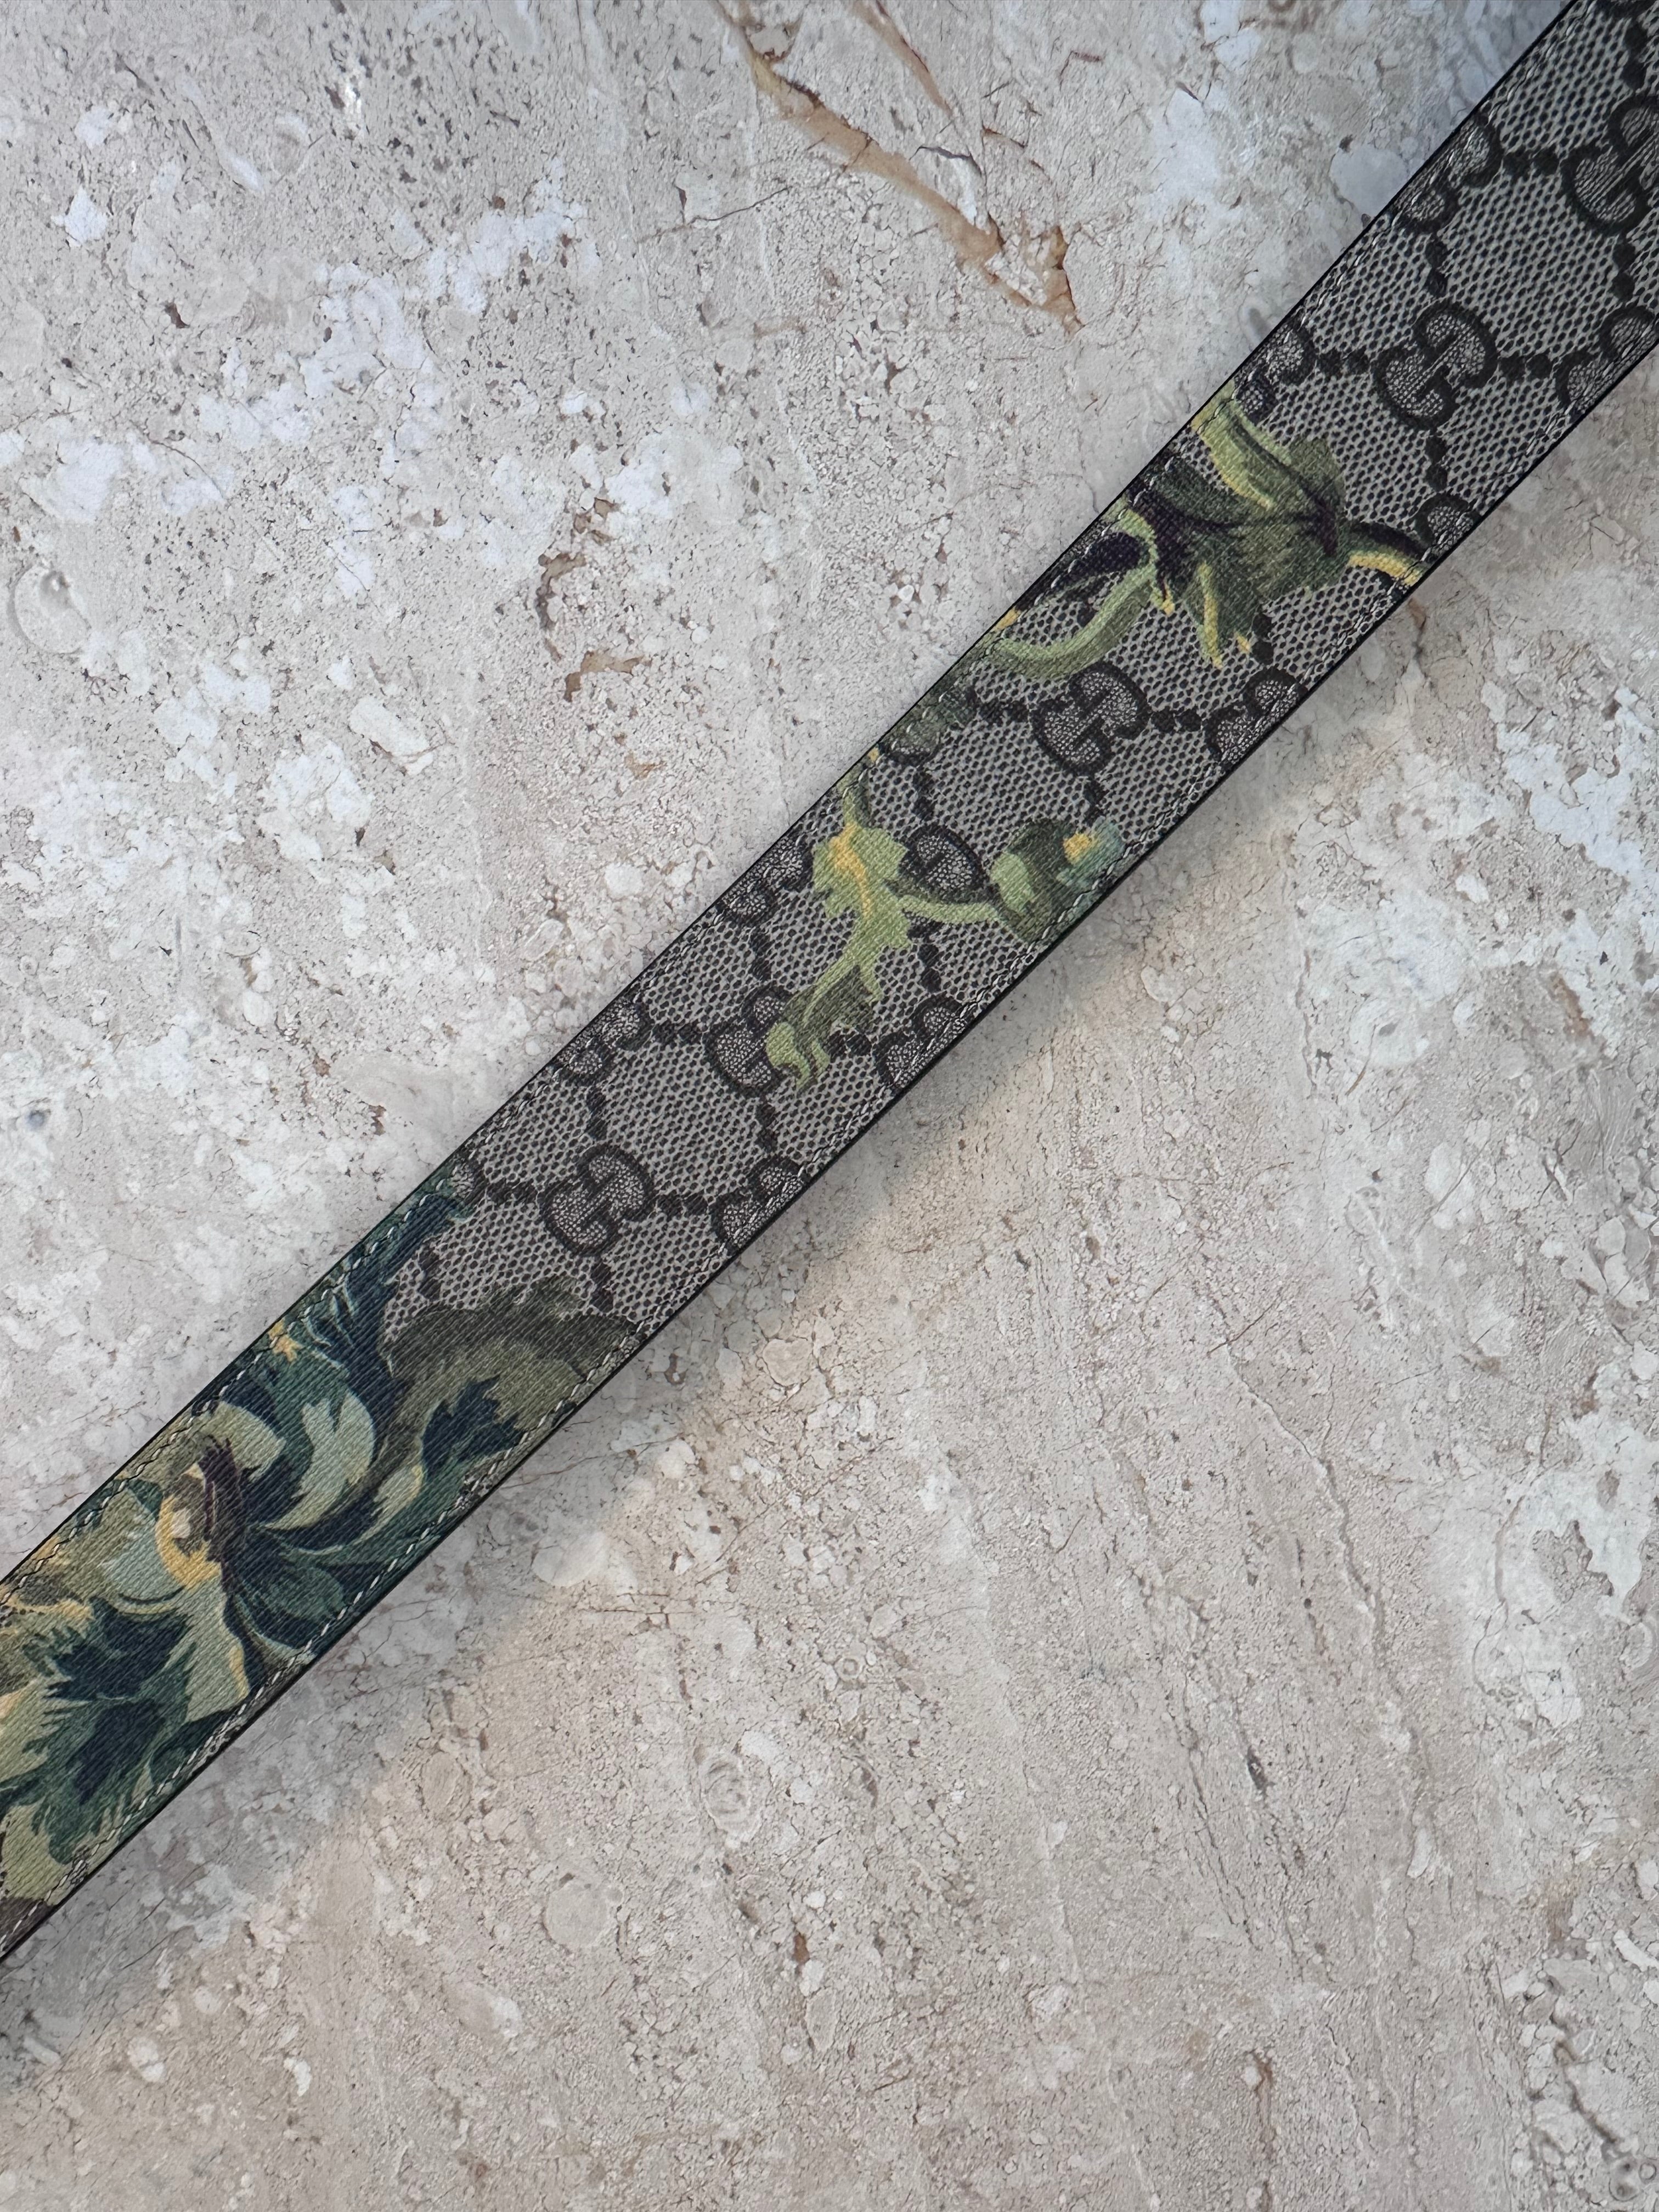 Pre-Owned GUCCI Flora Belt Size 80/32